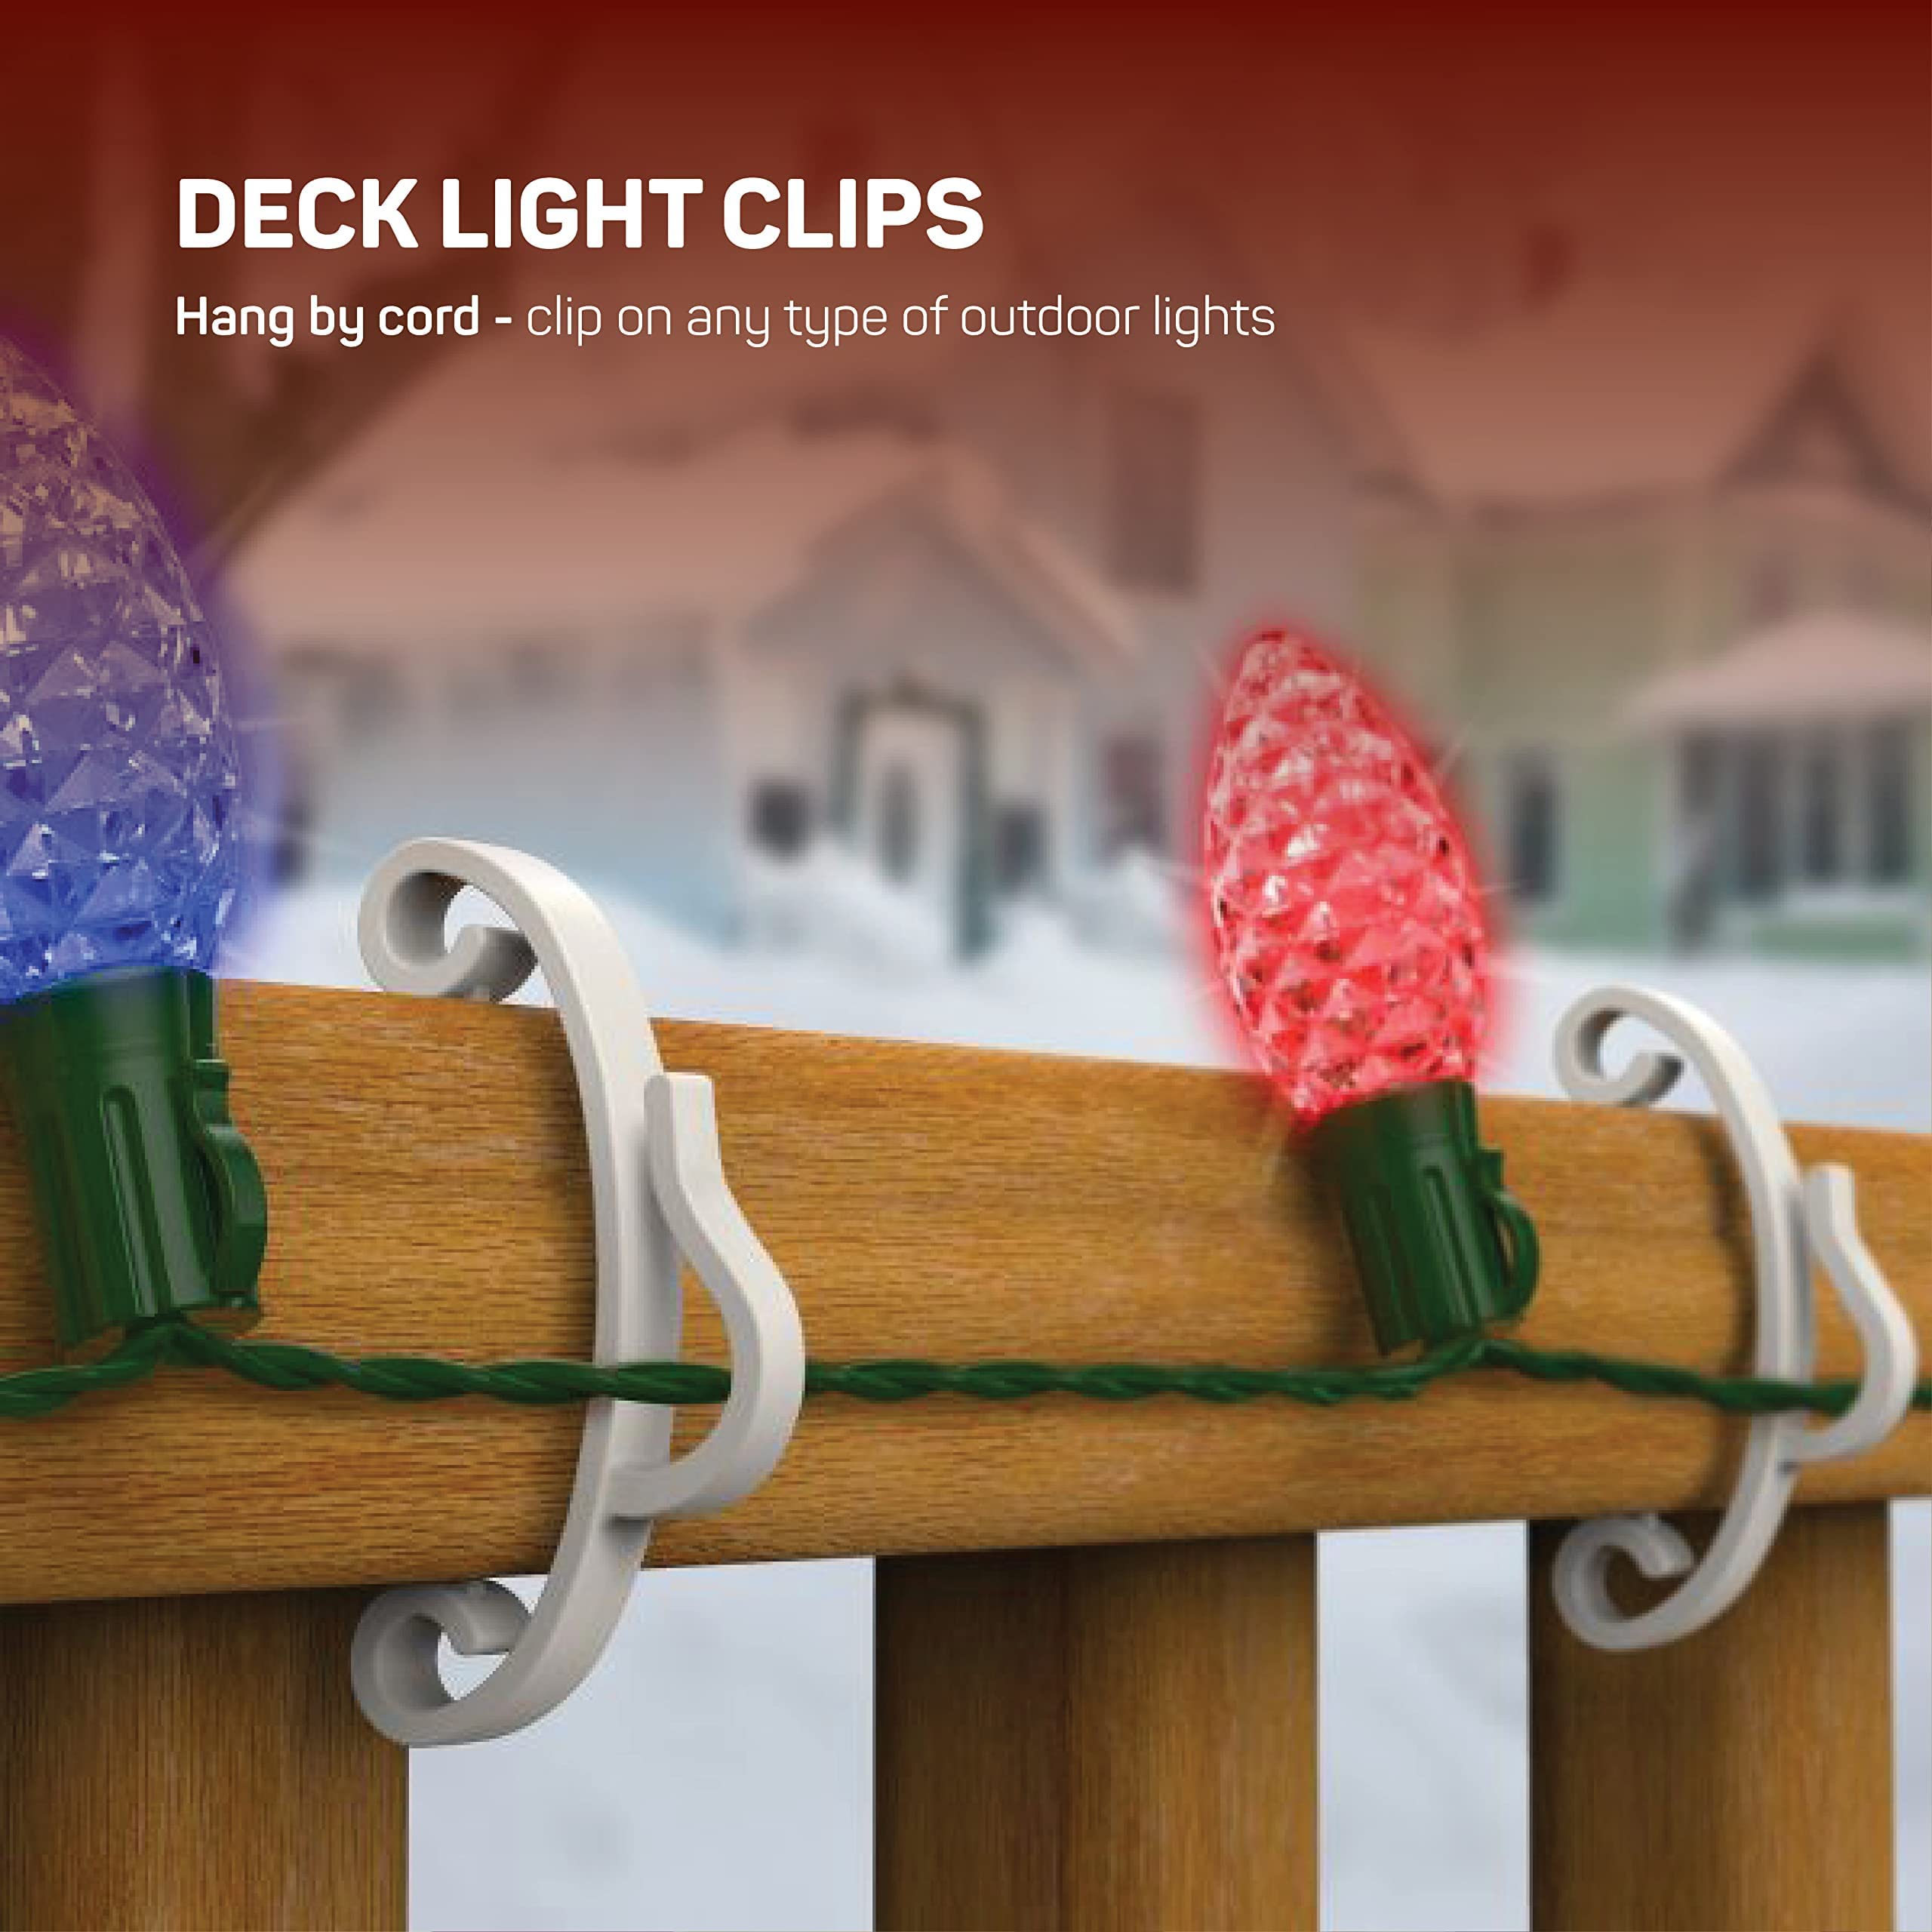 Holiday Light Clips [Set of 50] - Fascia Board Clips to Mount on Decks, Roof Eaves, Fences, Staircases - Made in USA, No Tools Required  - Very Good